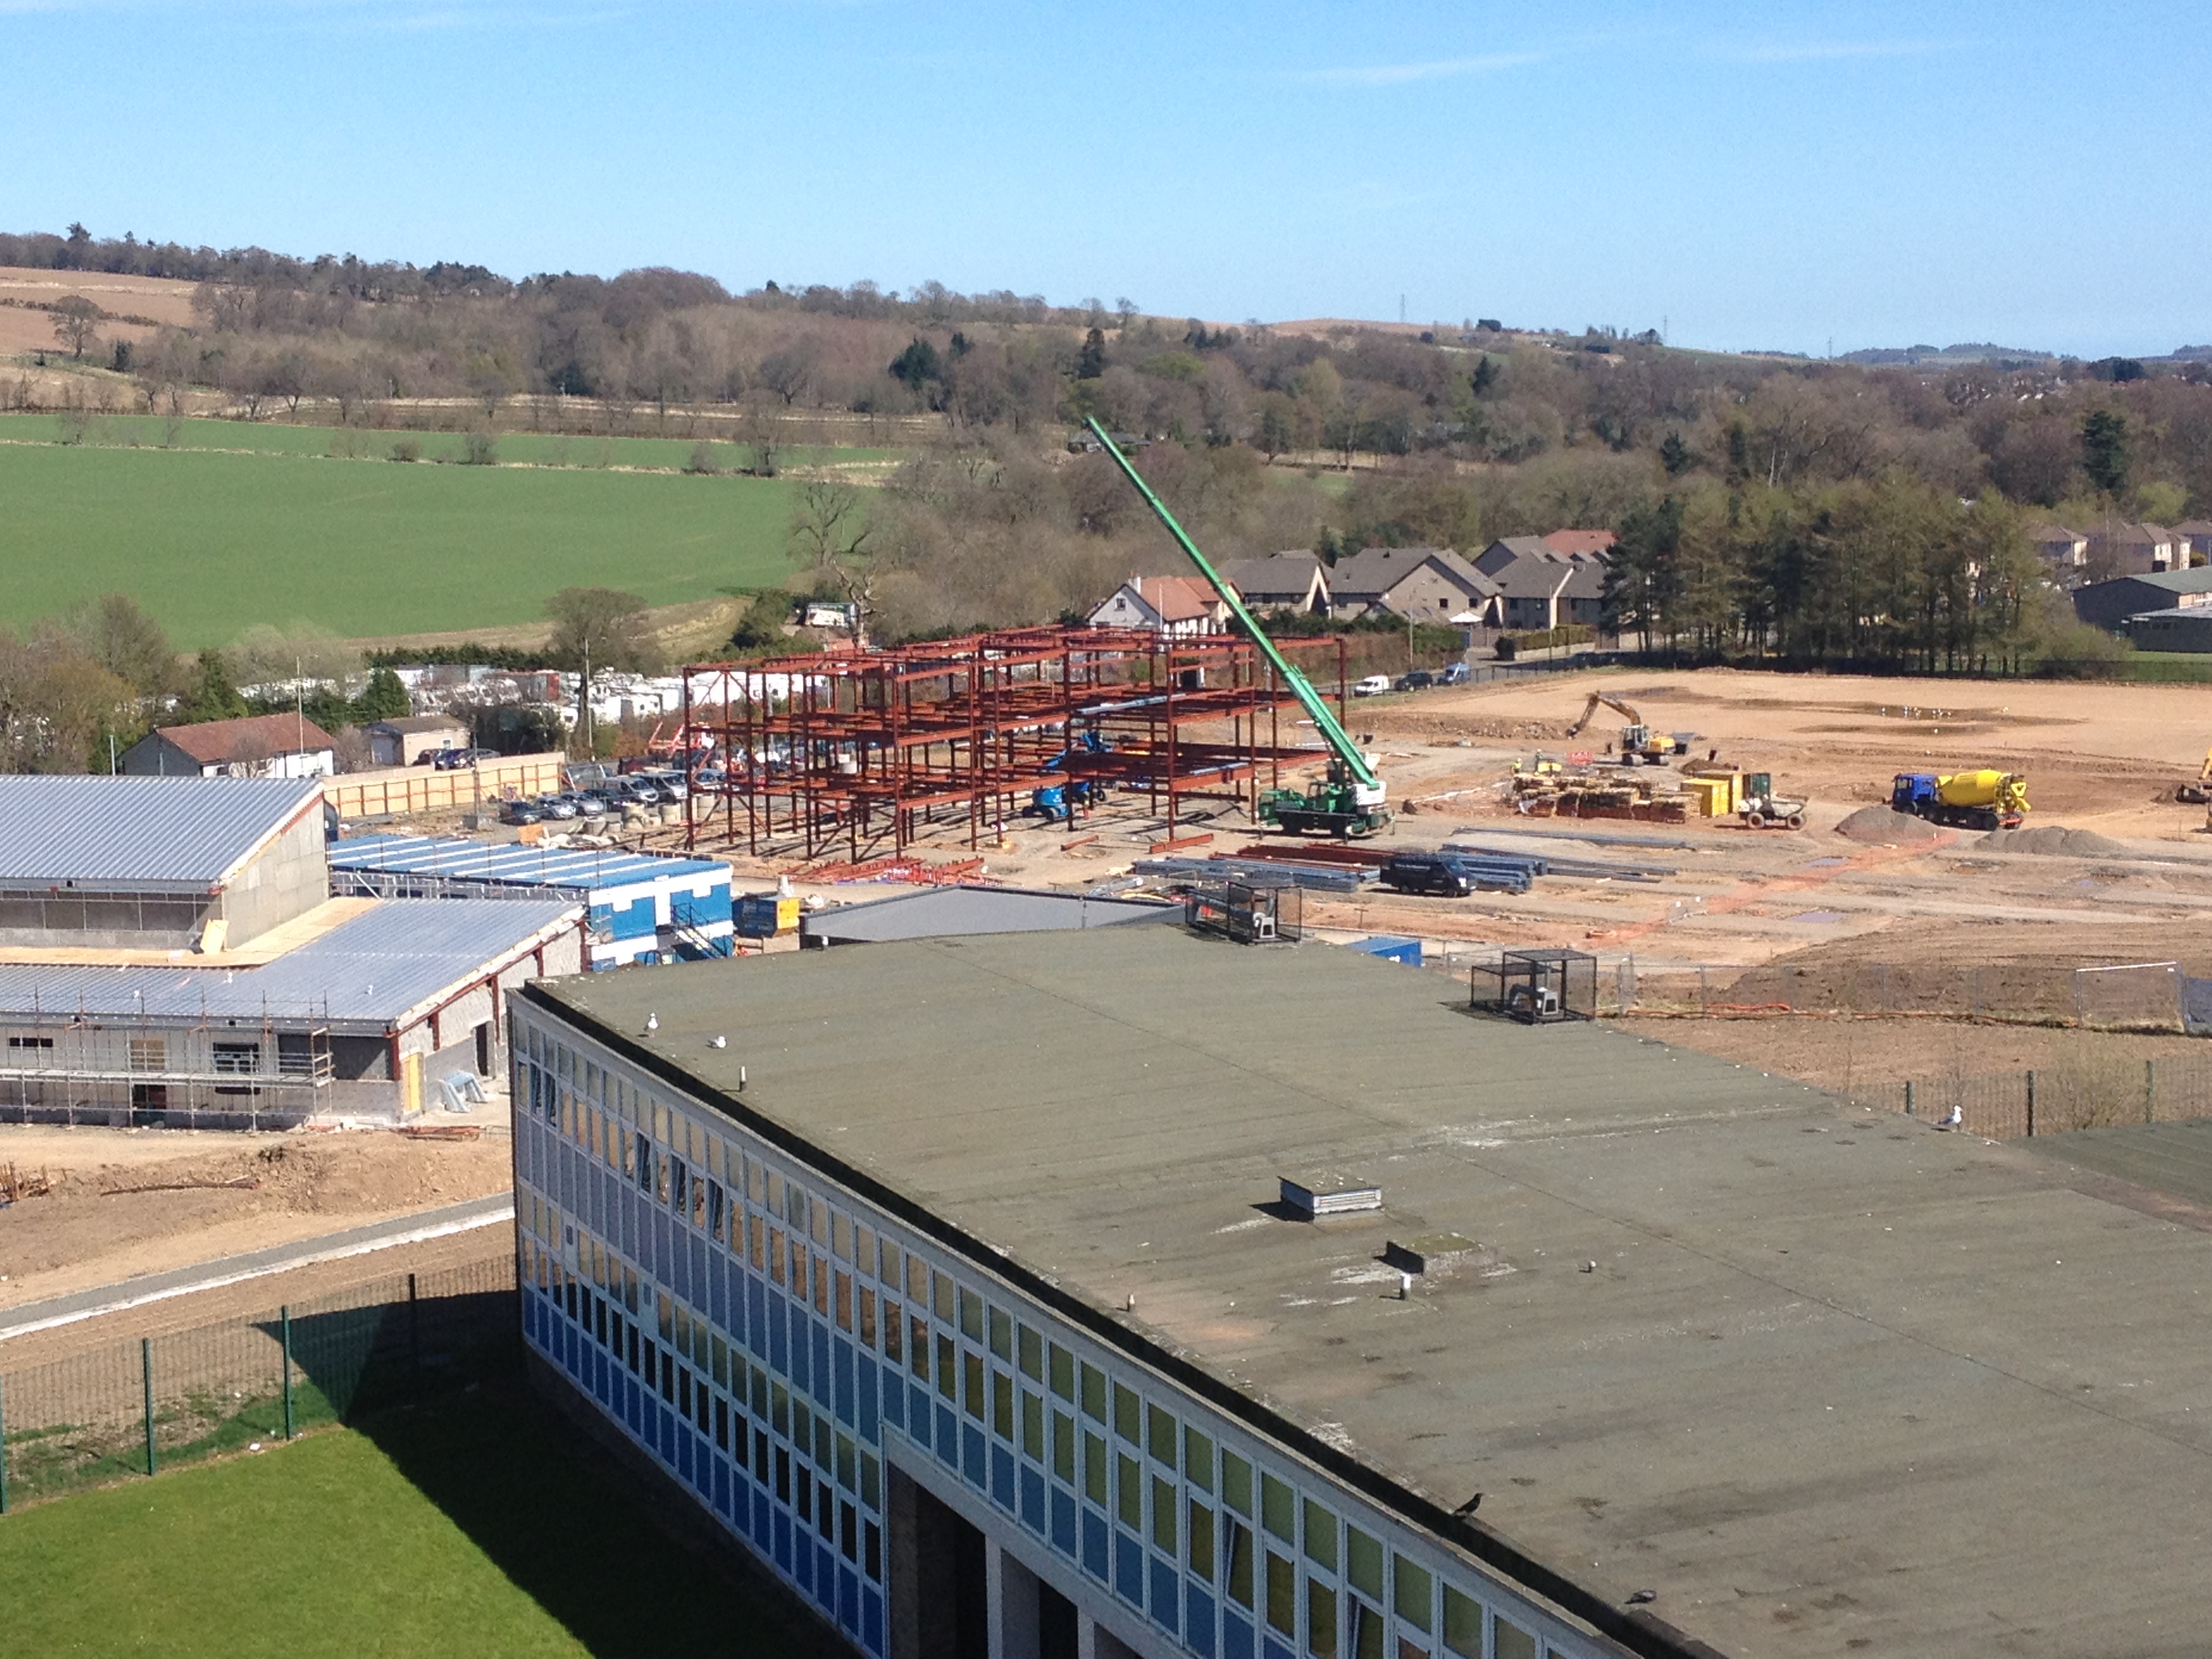 It's great being able to watch progress from our current premises......